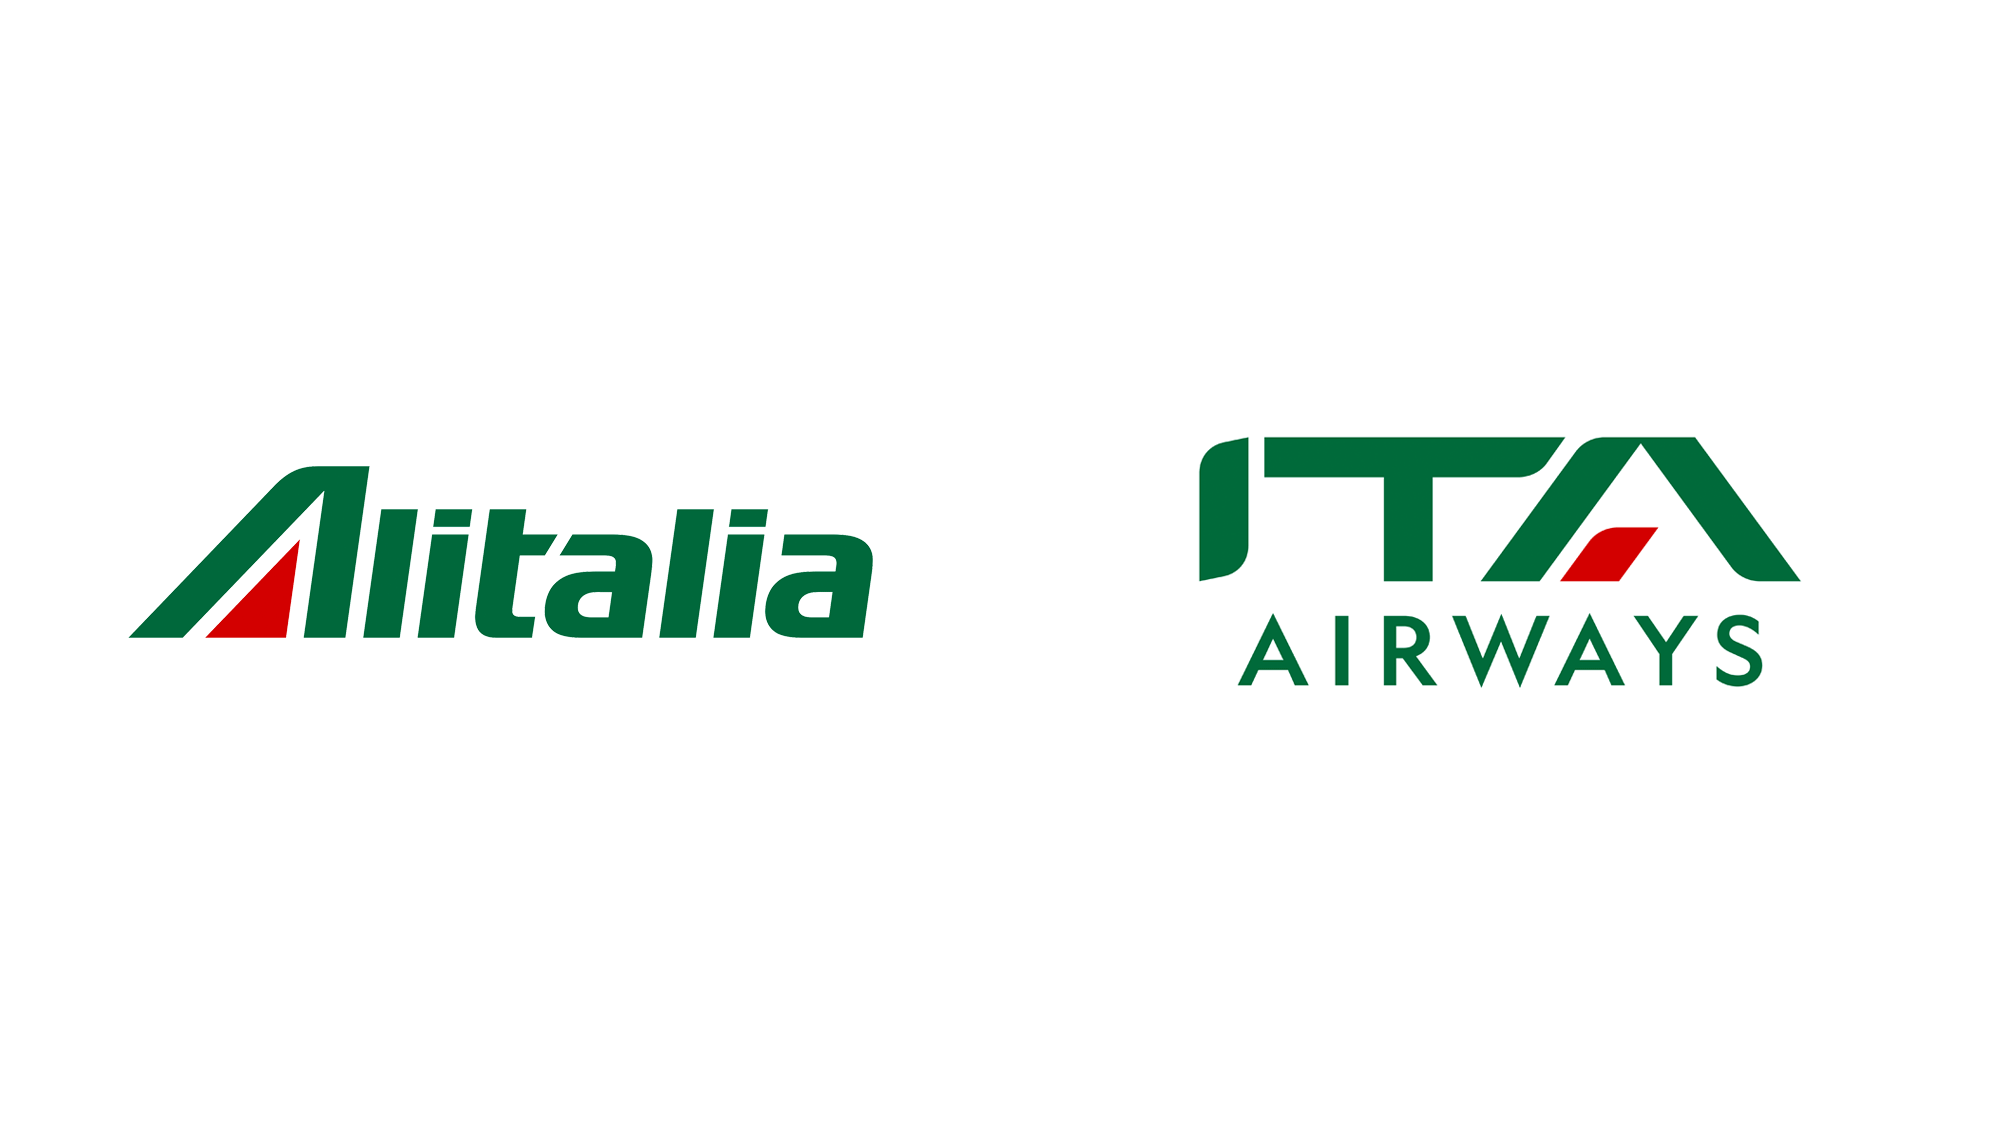 New Name, Logo, and Livery for ITA Airways